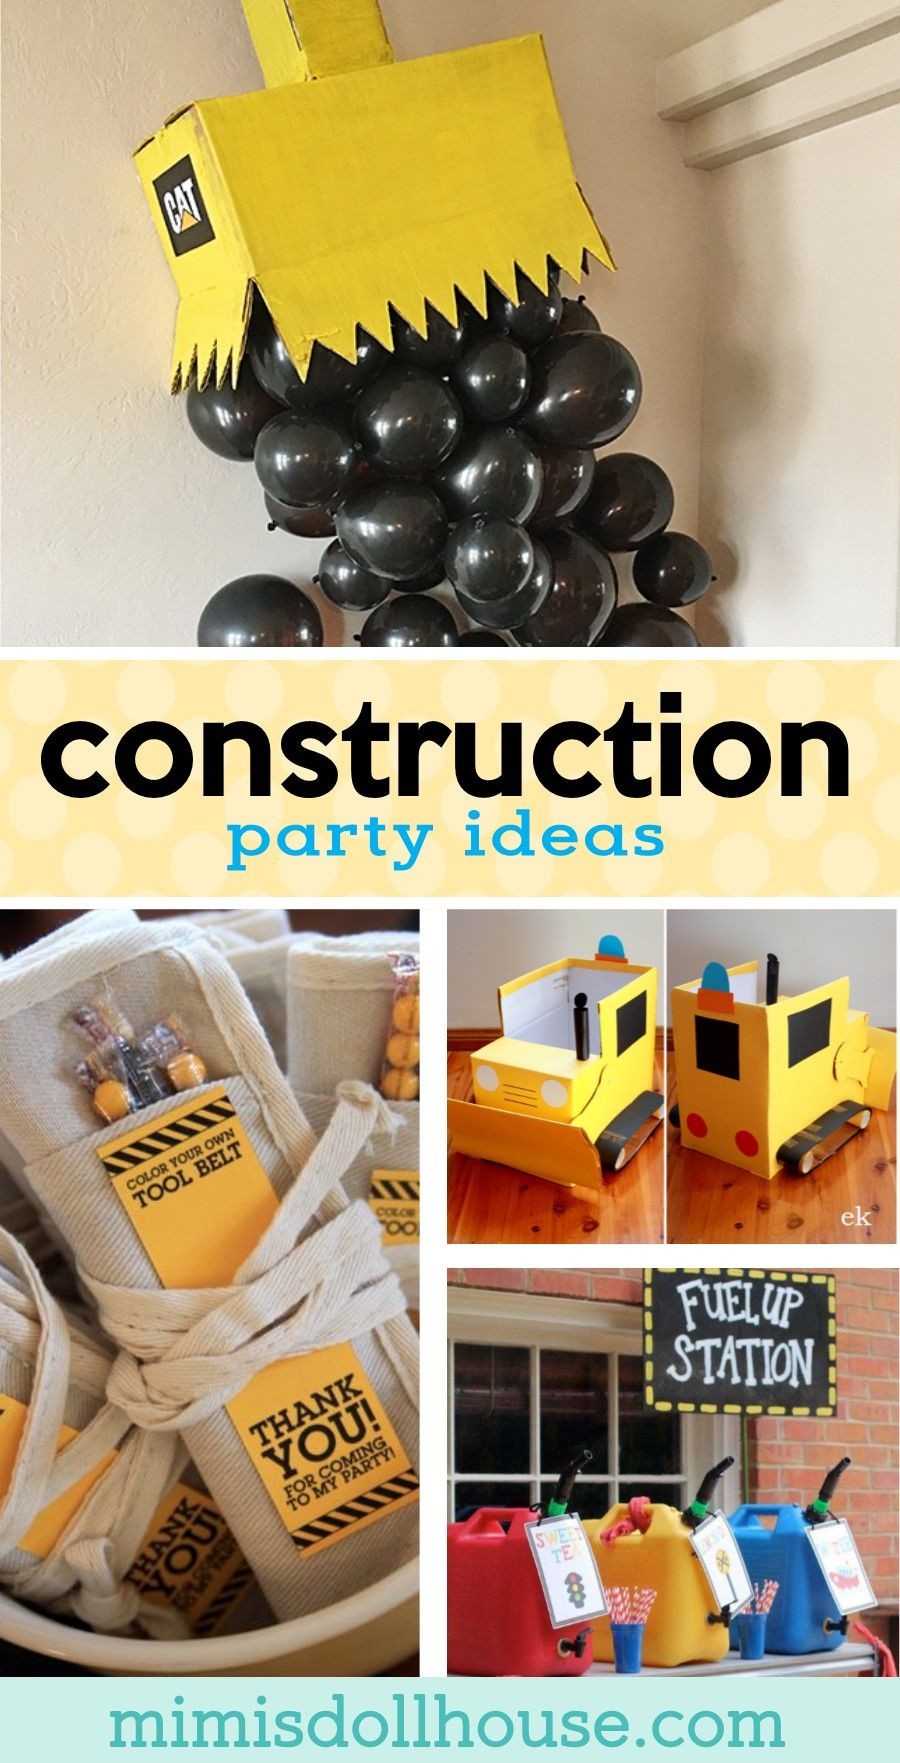 Construction Birthday Party Ideas Homemade
 Pin on Parties and Party Ideas